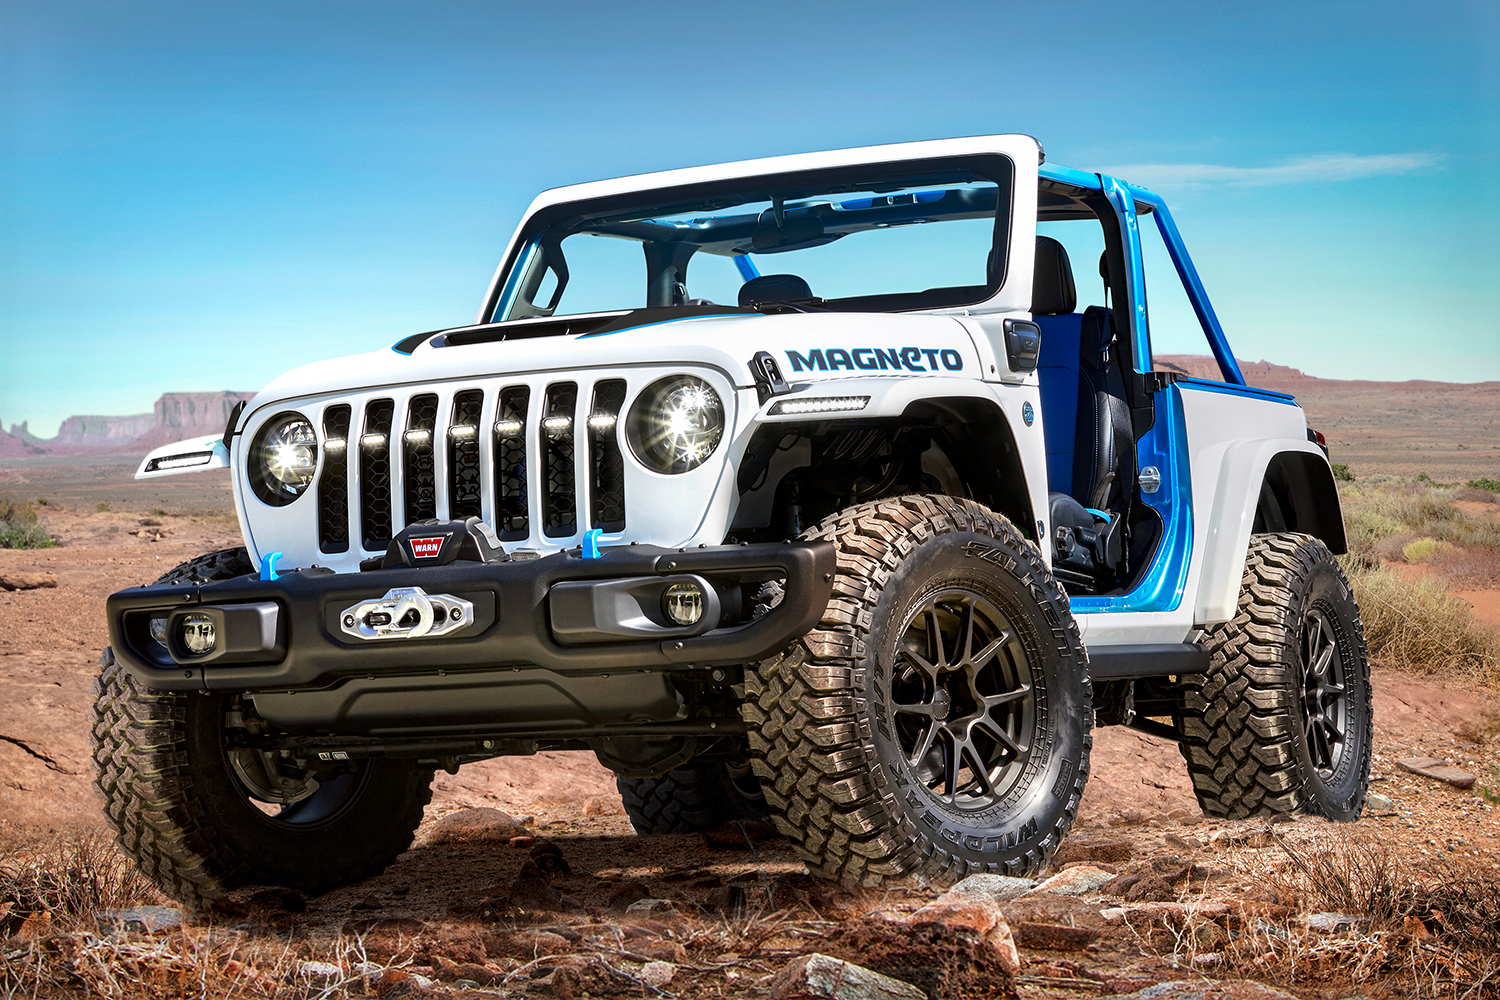 The electric Jeep Magneto, a concept Wrangler built for the Easter Jeep Safari